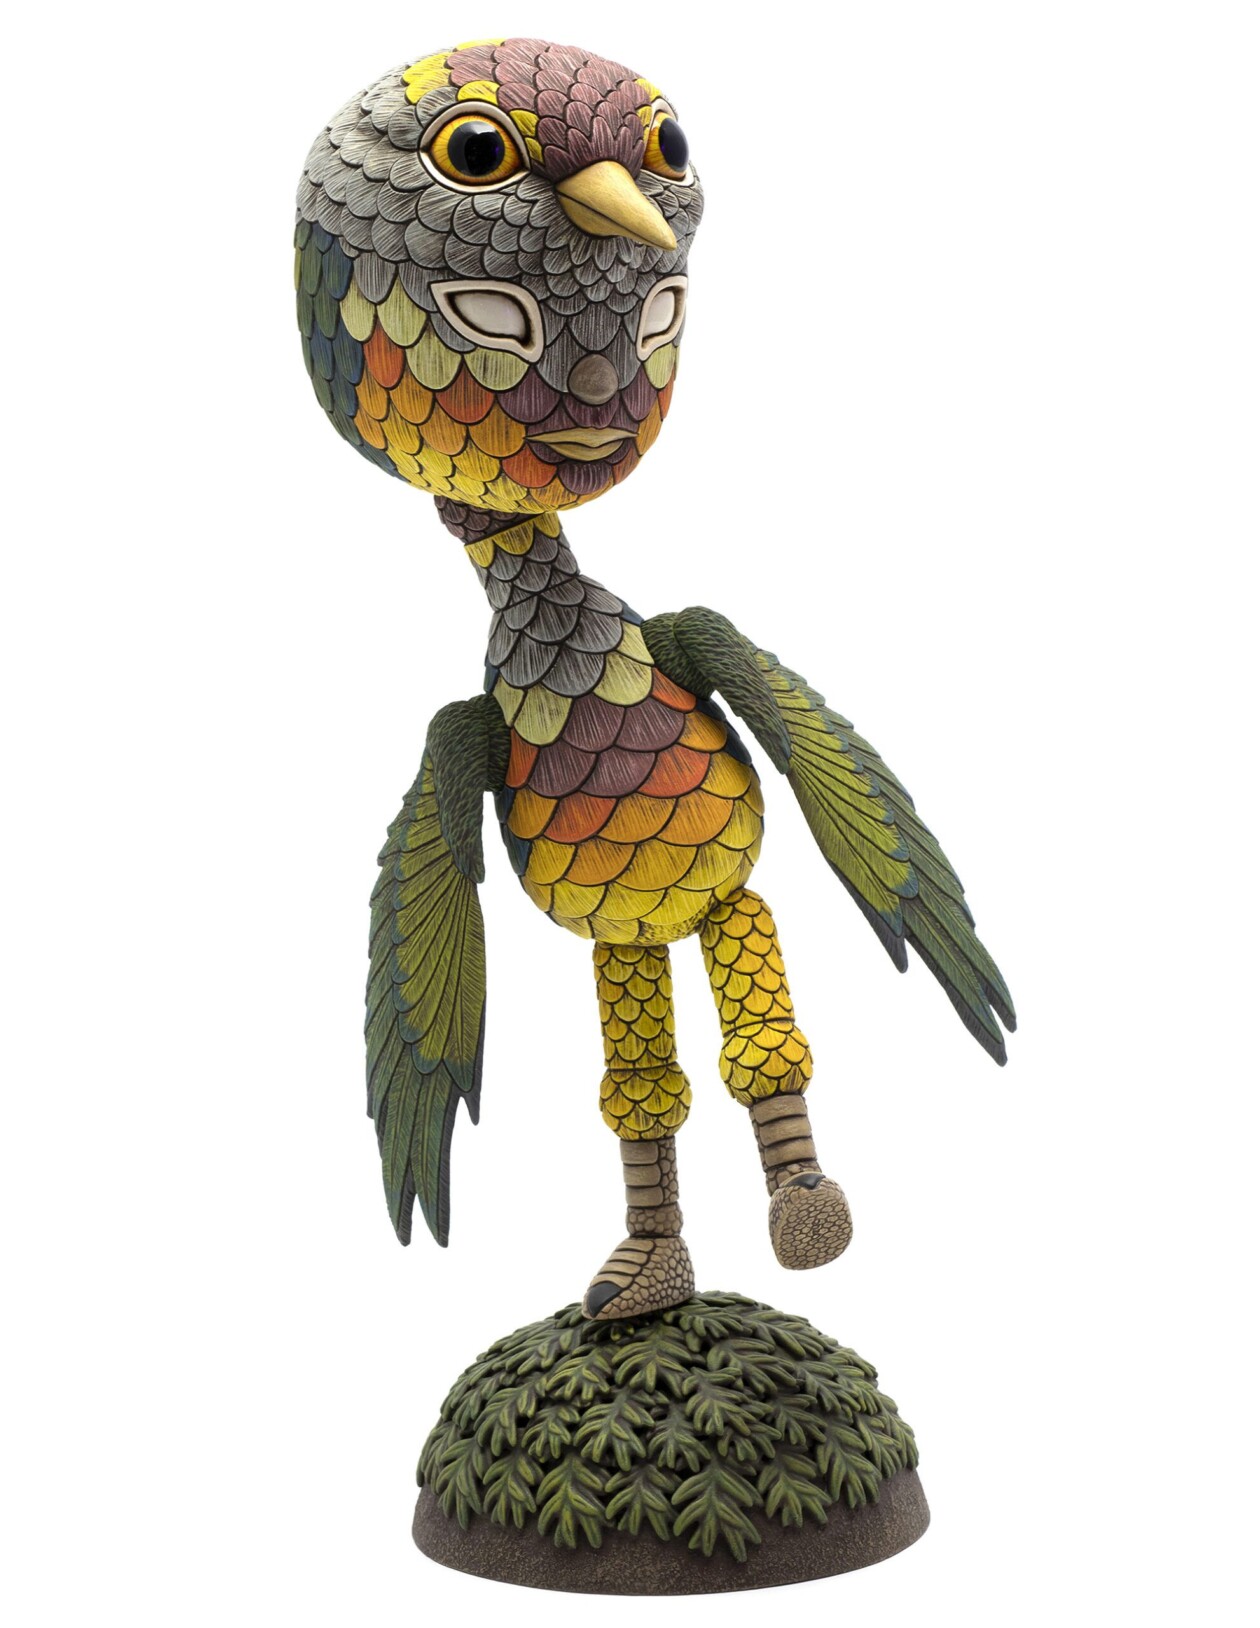 Marvelous Anthropomorphized Bird Sculptures By Calvin Ma (23)